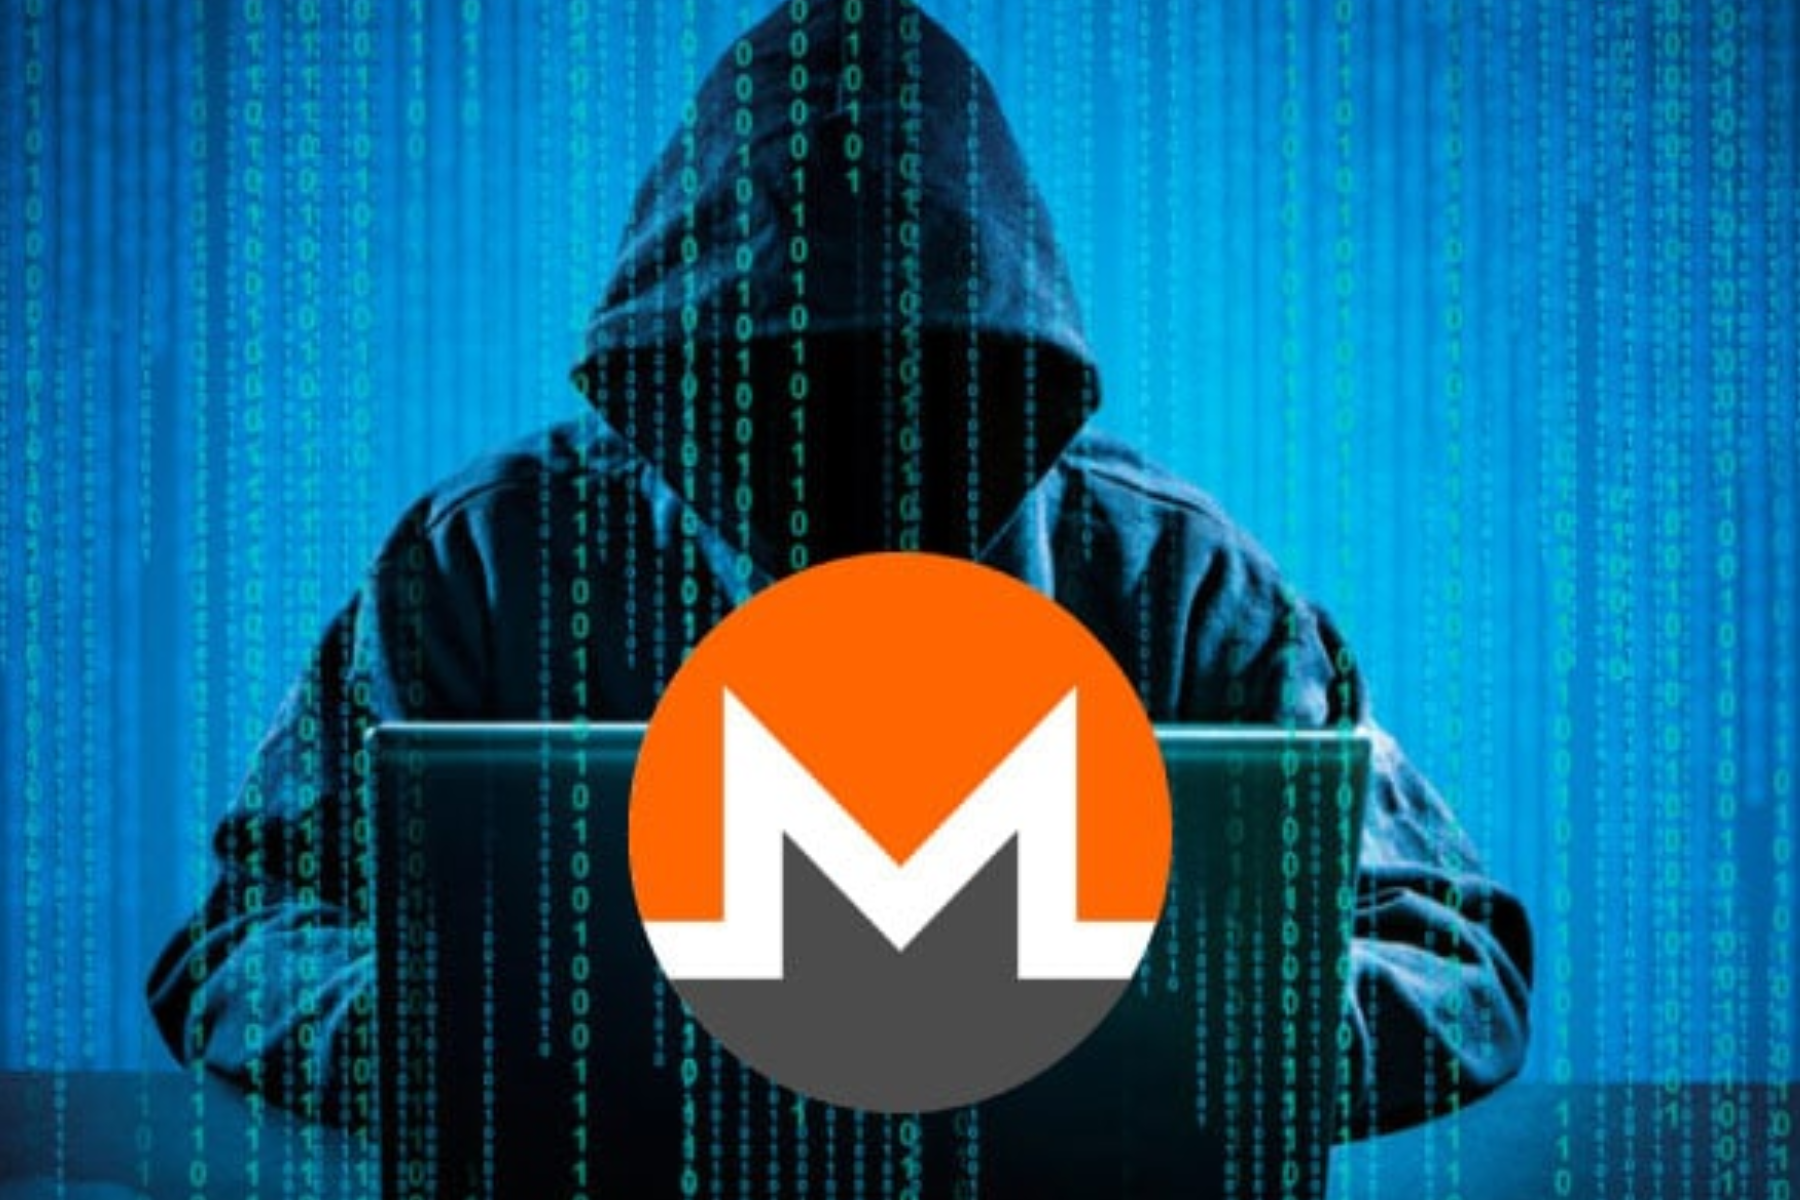 A person with expertise in computers sitting in front of the Monero logo